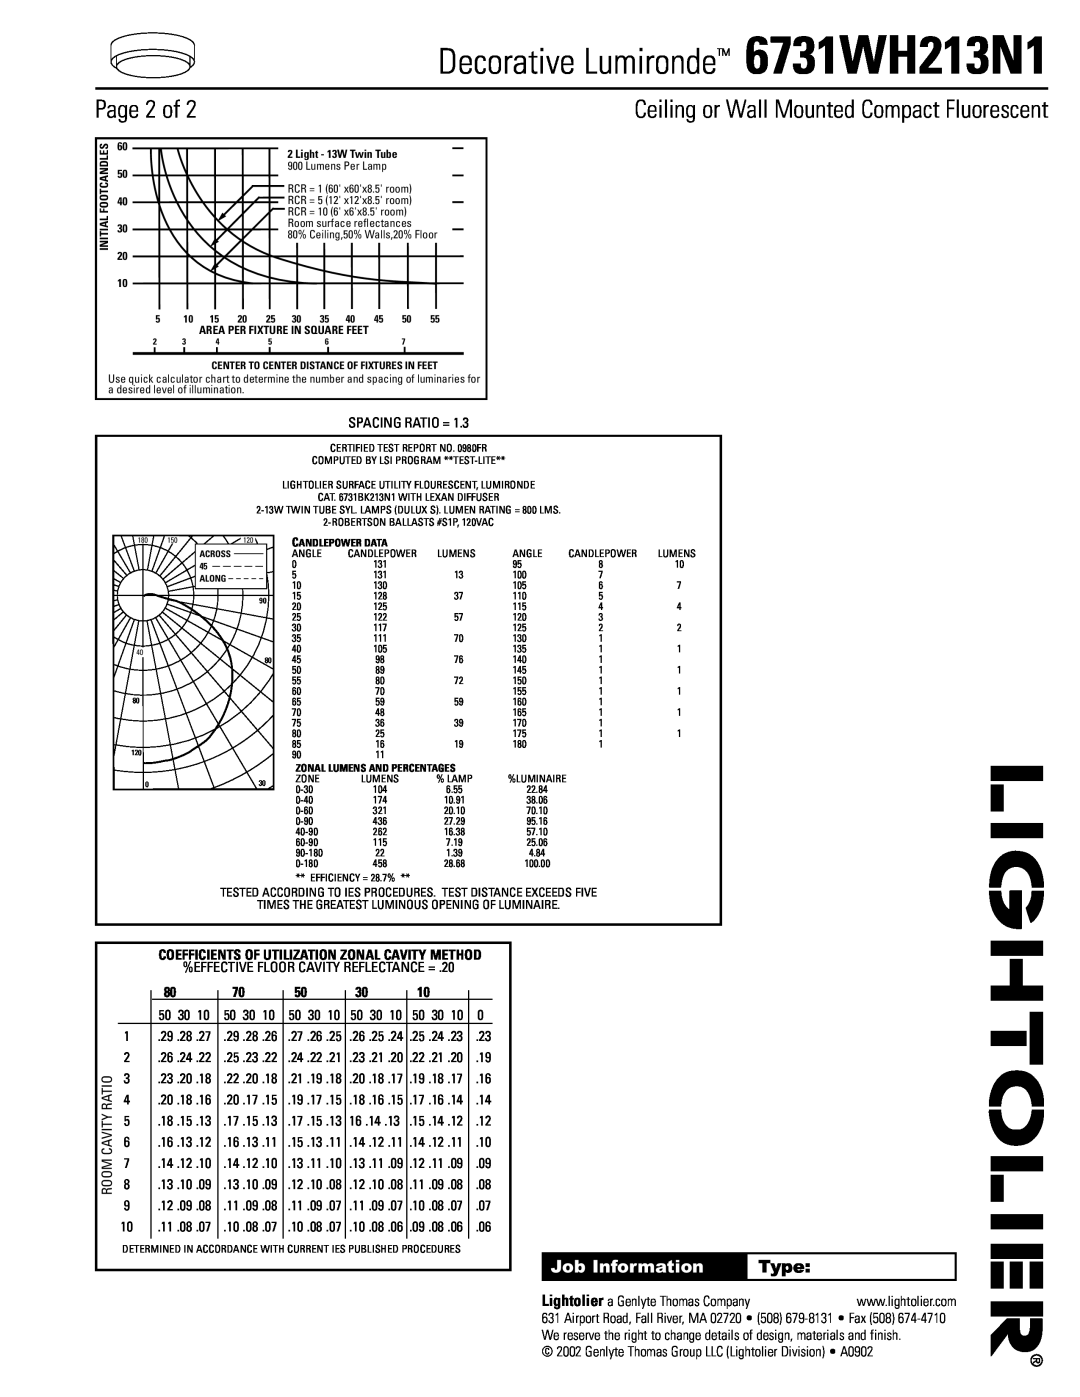 Lightolier manual Page 2 of, Type, Decorative Lumironde 6731WH213N1, Ceiling or Wall Mounted Compact Fluorescent 